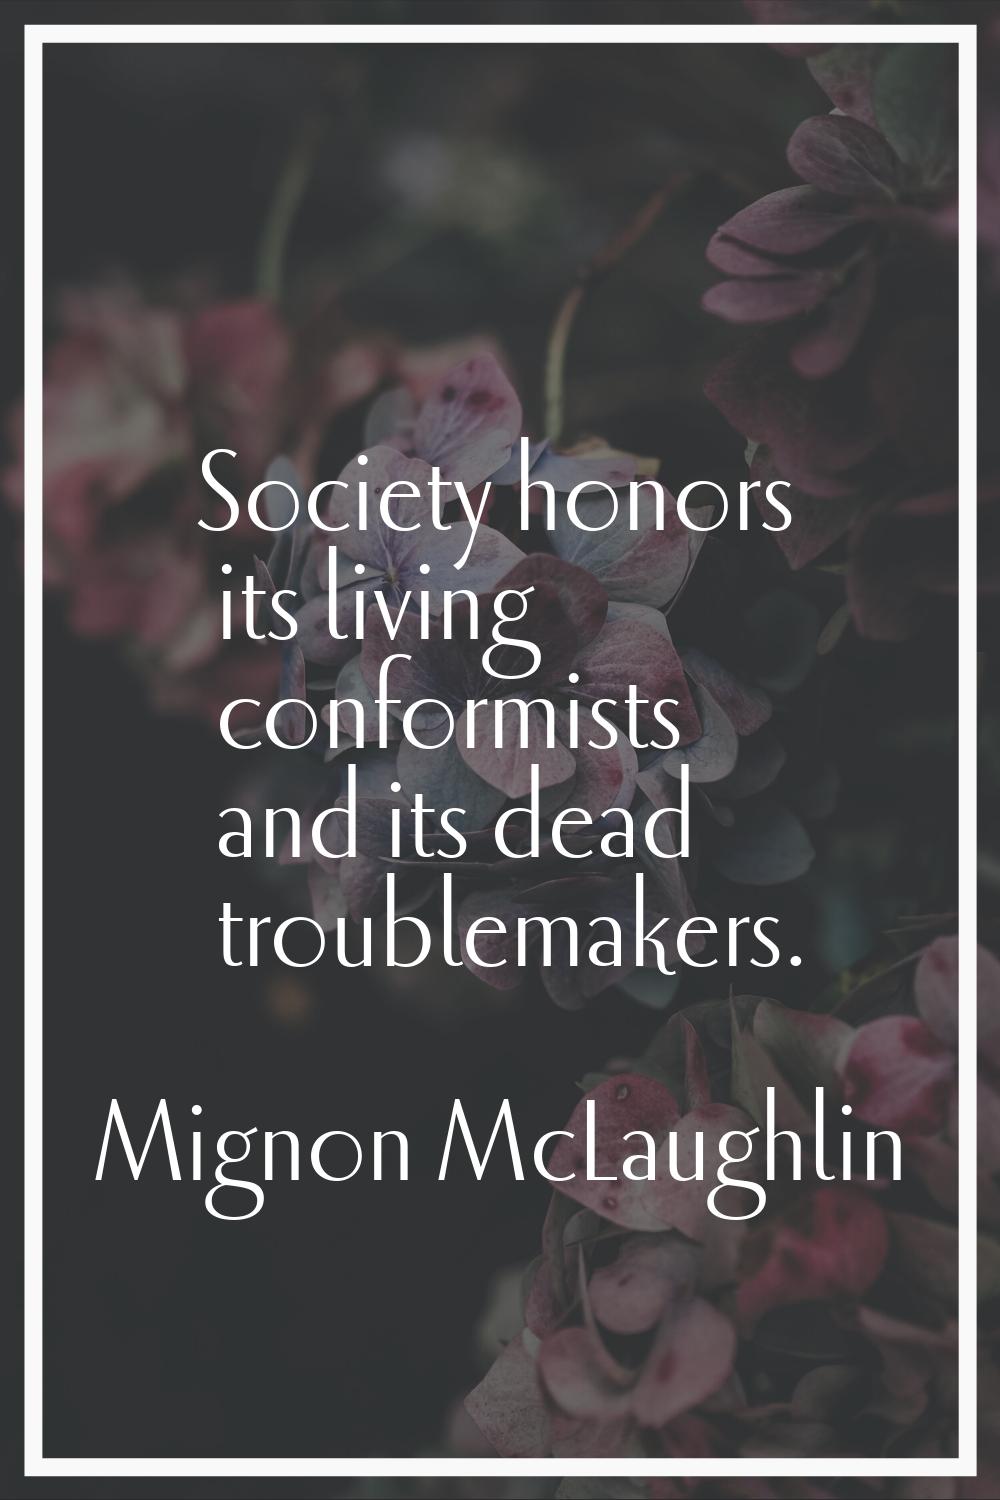 Society honors its living conformists and its dead troublemakers.